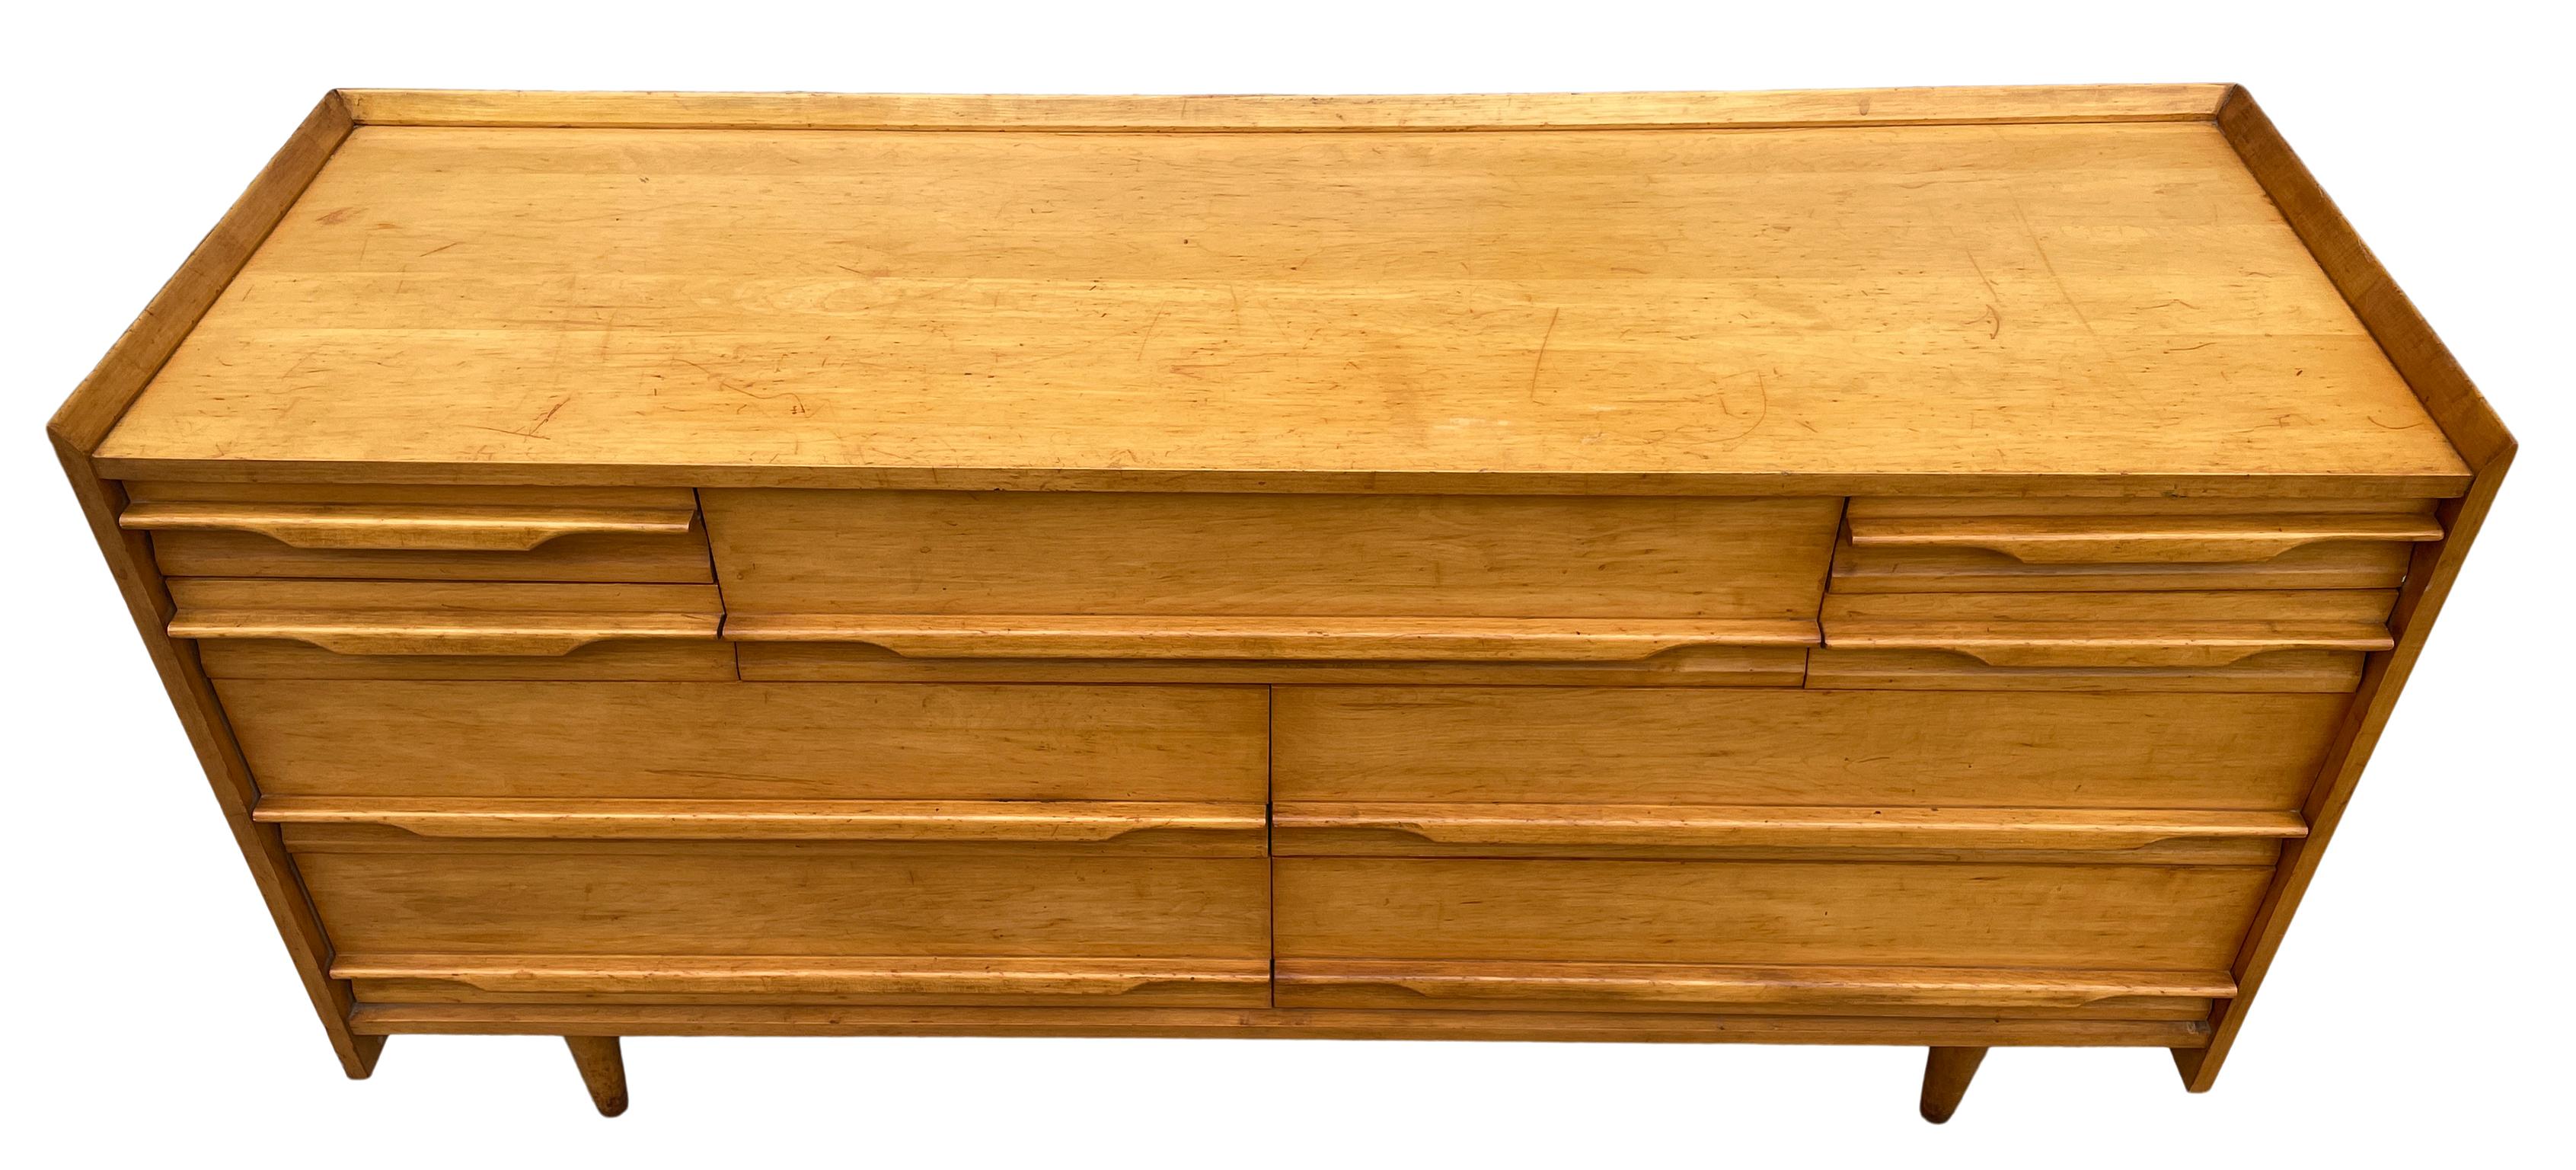 Unique Mid-Century Modern American solid maple tall 9 drawer low long dresser by Crawford. All solid maple construction with carved handles and sits on 4 tapered legs. Vintage original condition. Shows wear on top surface drawers clean inside. Metal